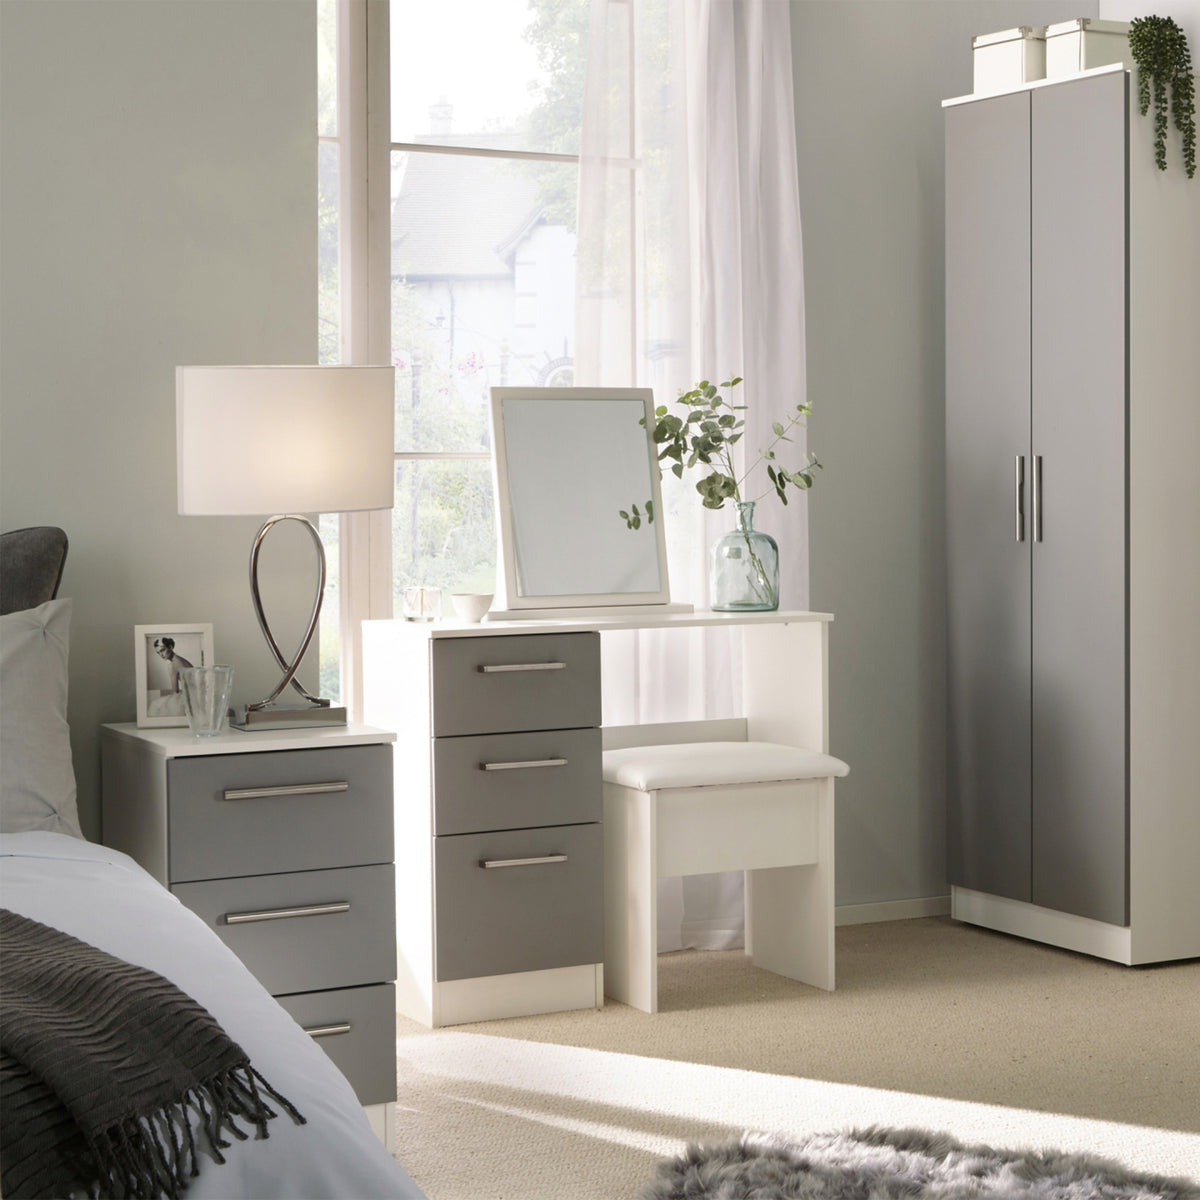 Blakely Grey and White 3 Drawer Bedside Cabinet for bedroom